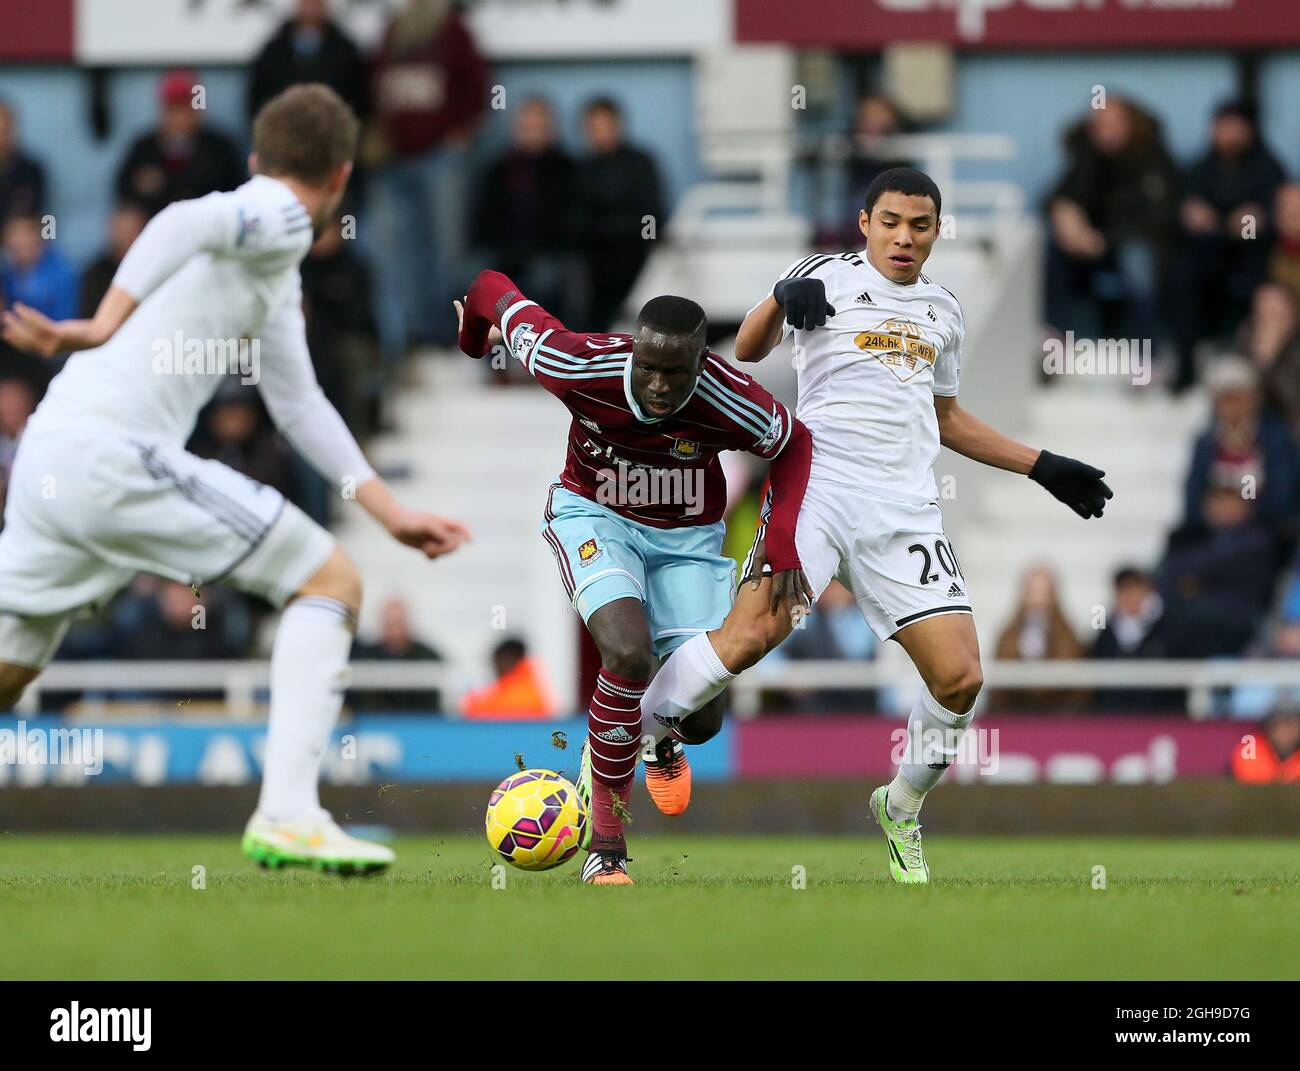 West Ham's Enner Valencia tussles with Swansea's Jefferson Montero during the Barclays Premier League match between West Ham United and Swansea City in Upton Park, London , England on 7th December 2014. Stock Photo